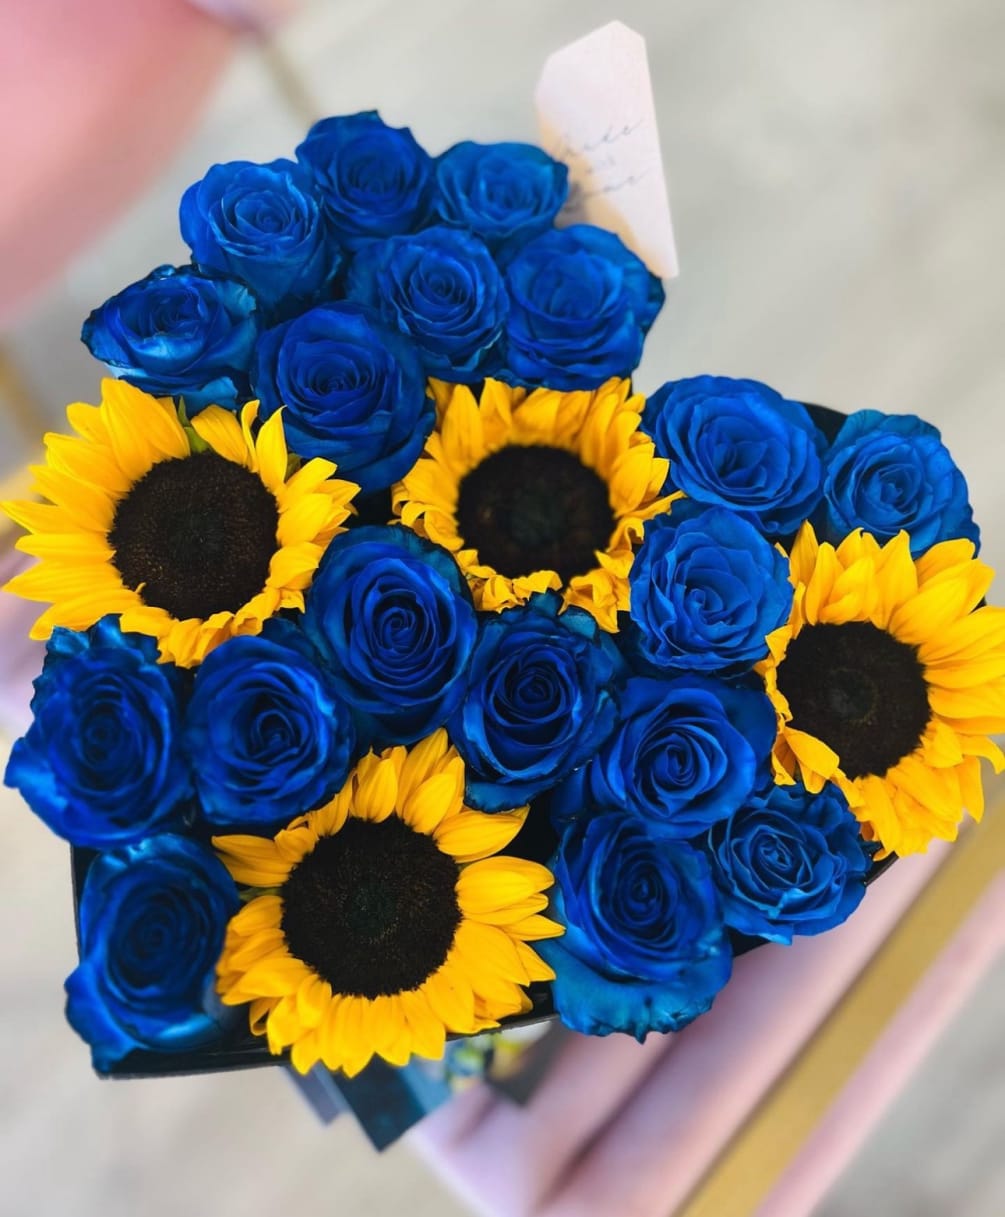 Medium heart box with Ecuadorian blue roses and sunflowers. The perfect gift